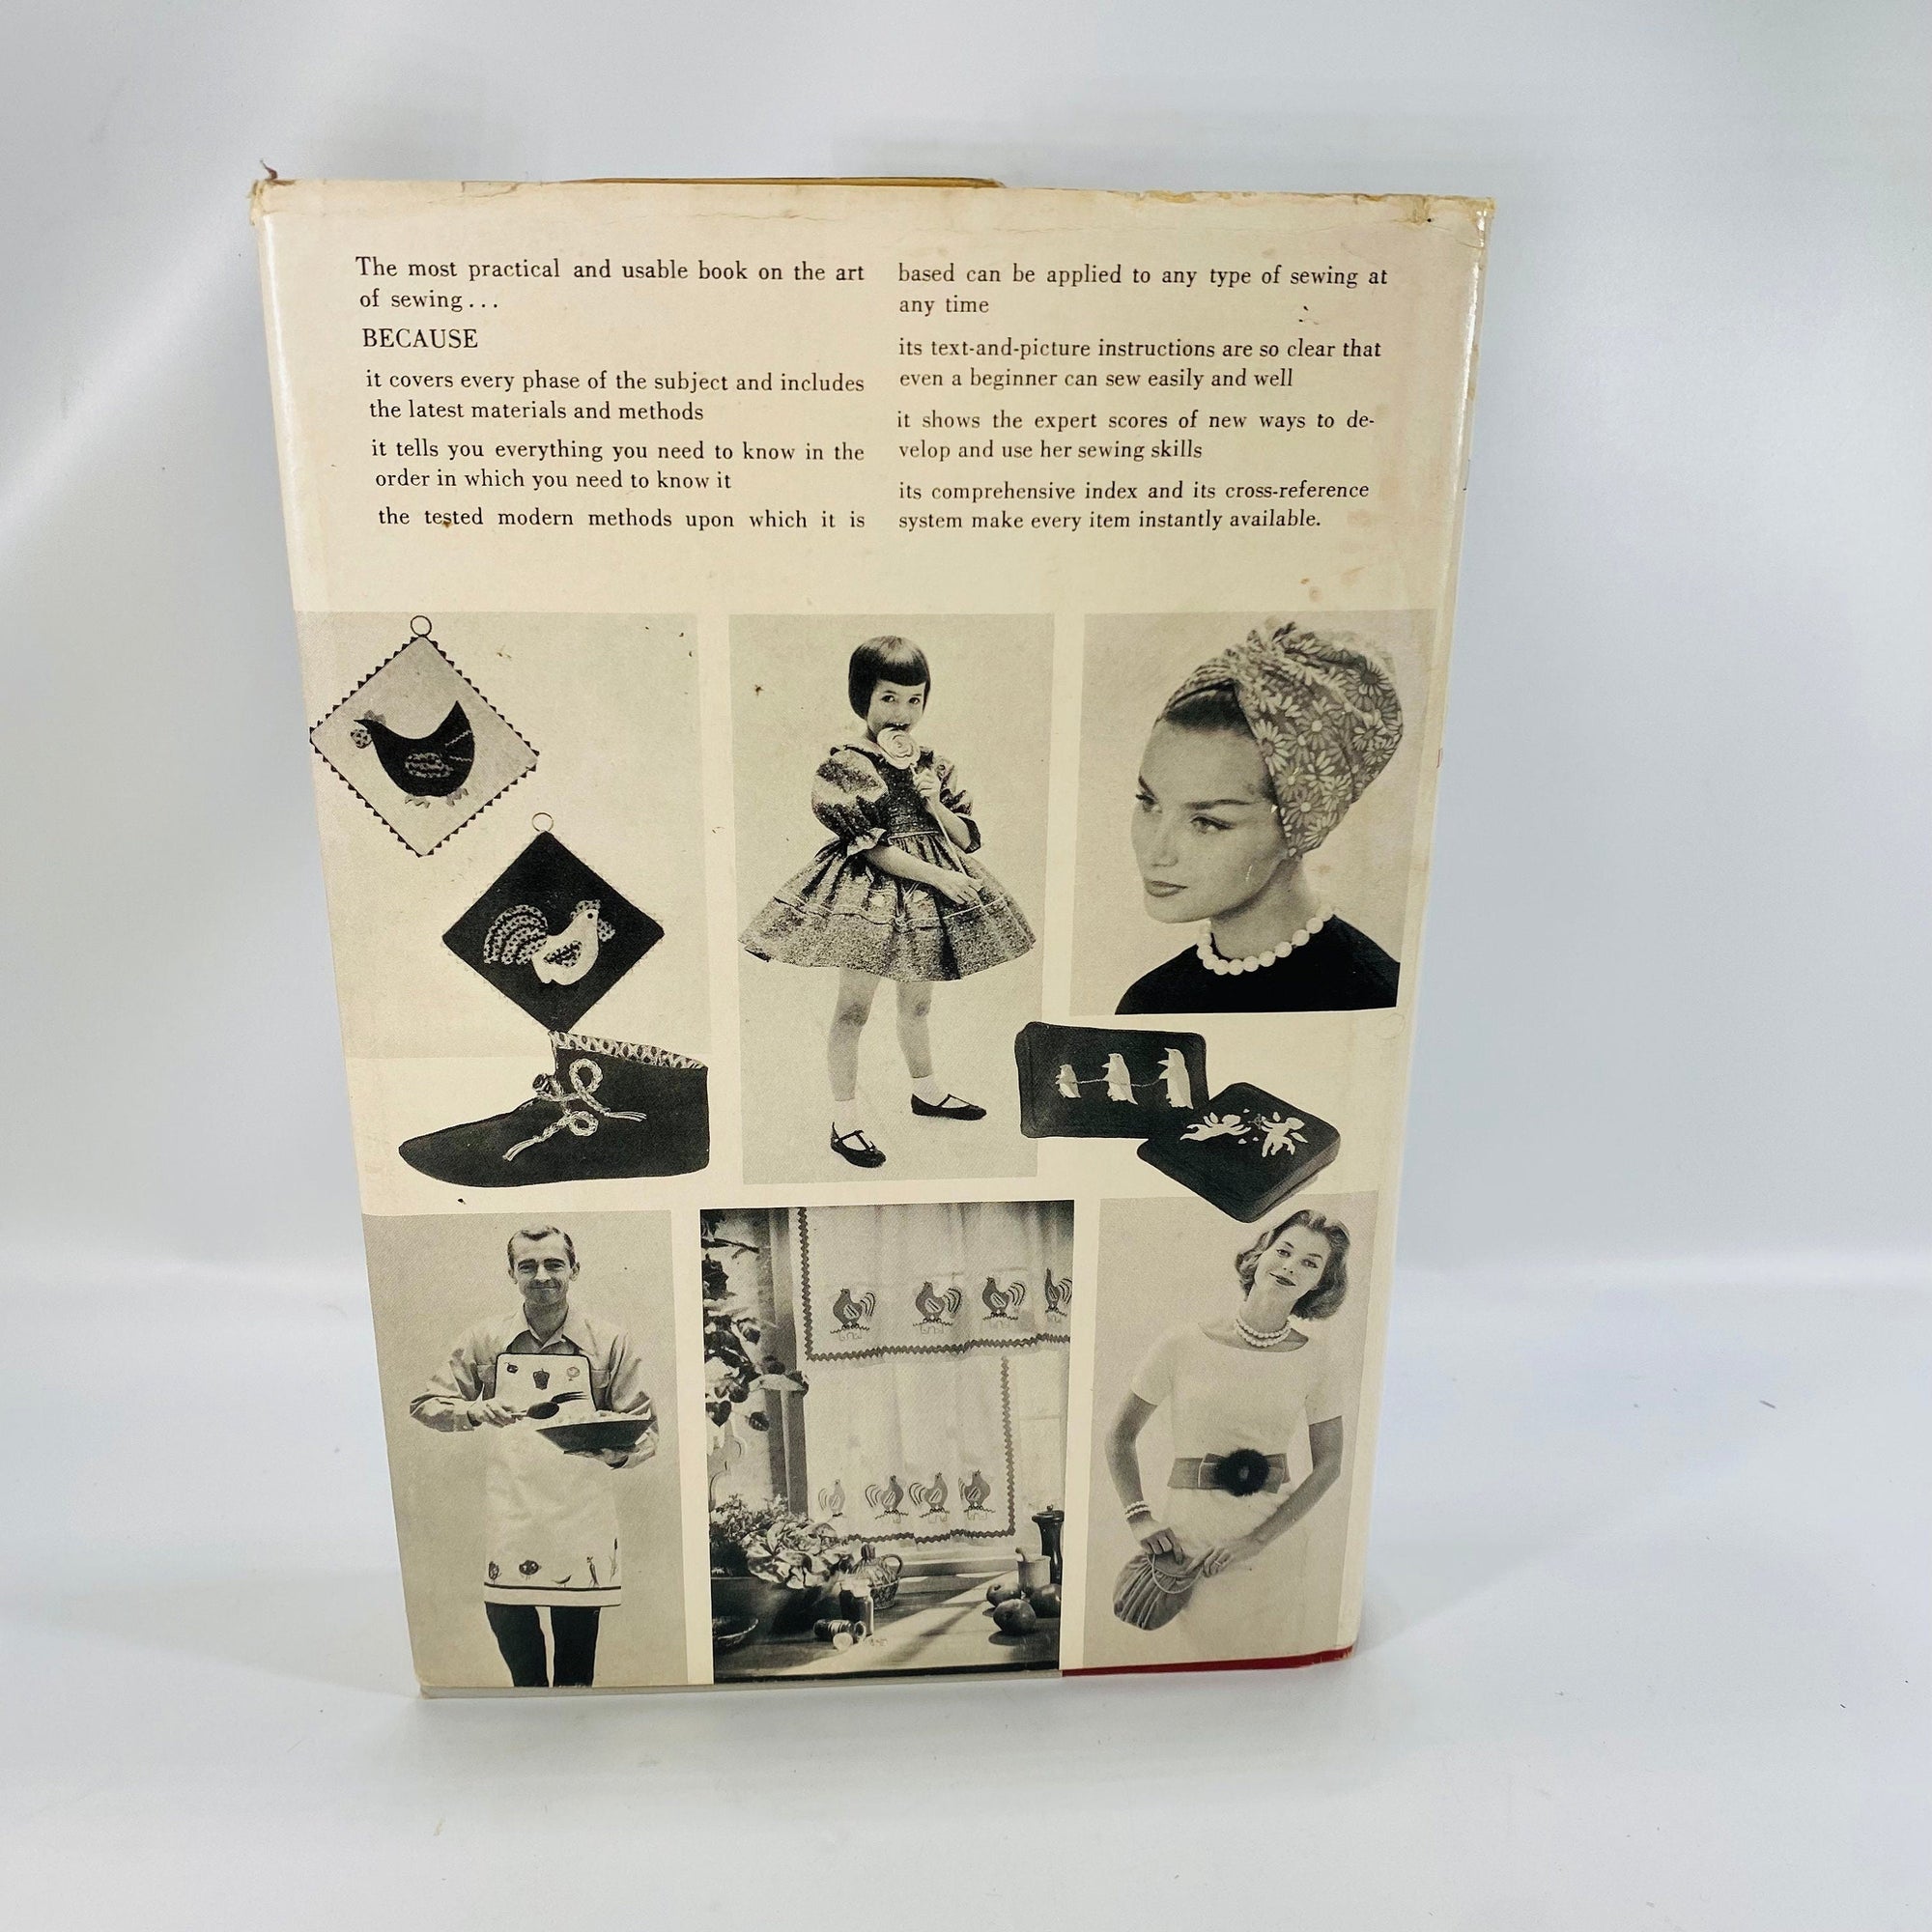 Sewing Made Easy by Mary Lynch 1960 Garden City Books